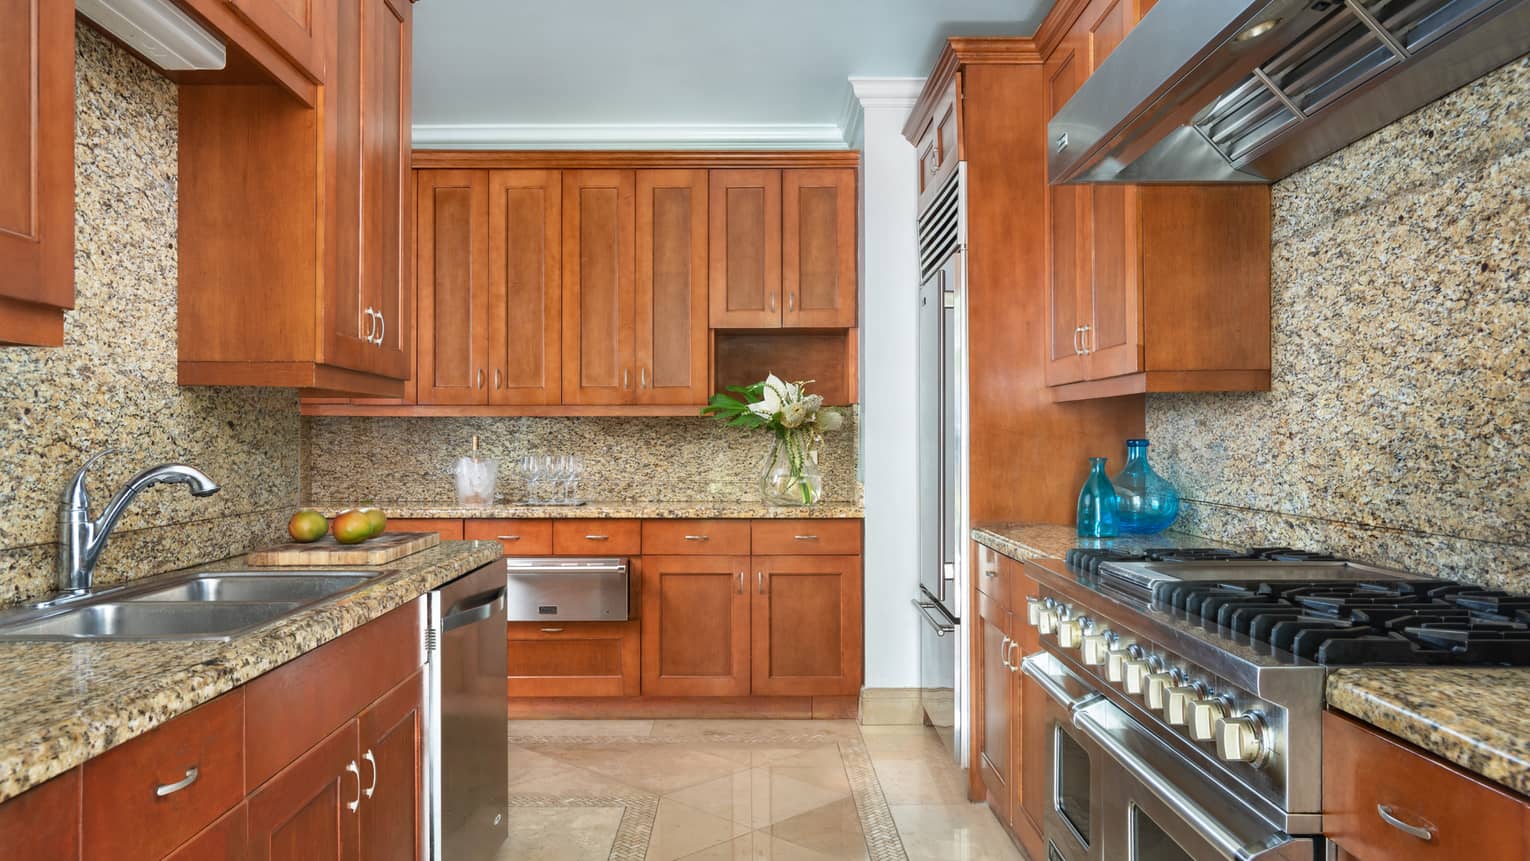 Beachfront Villa Residence Kitchen with wood cabinets, marble counters and backsplash, stainless steel appliances